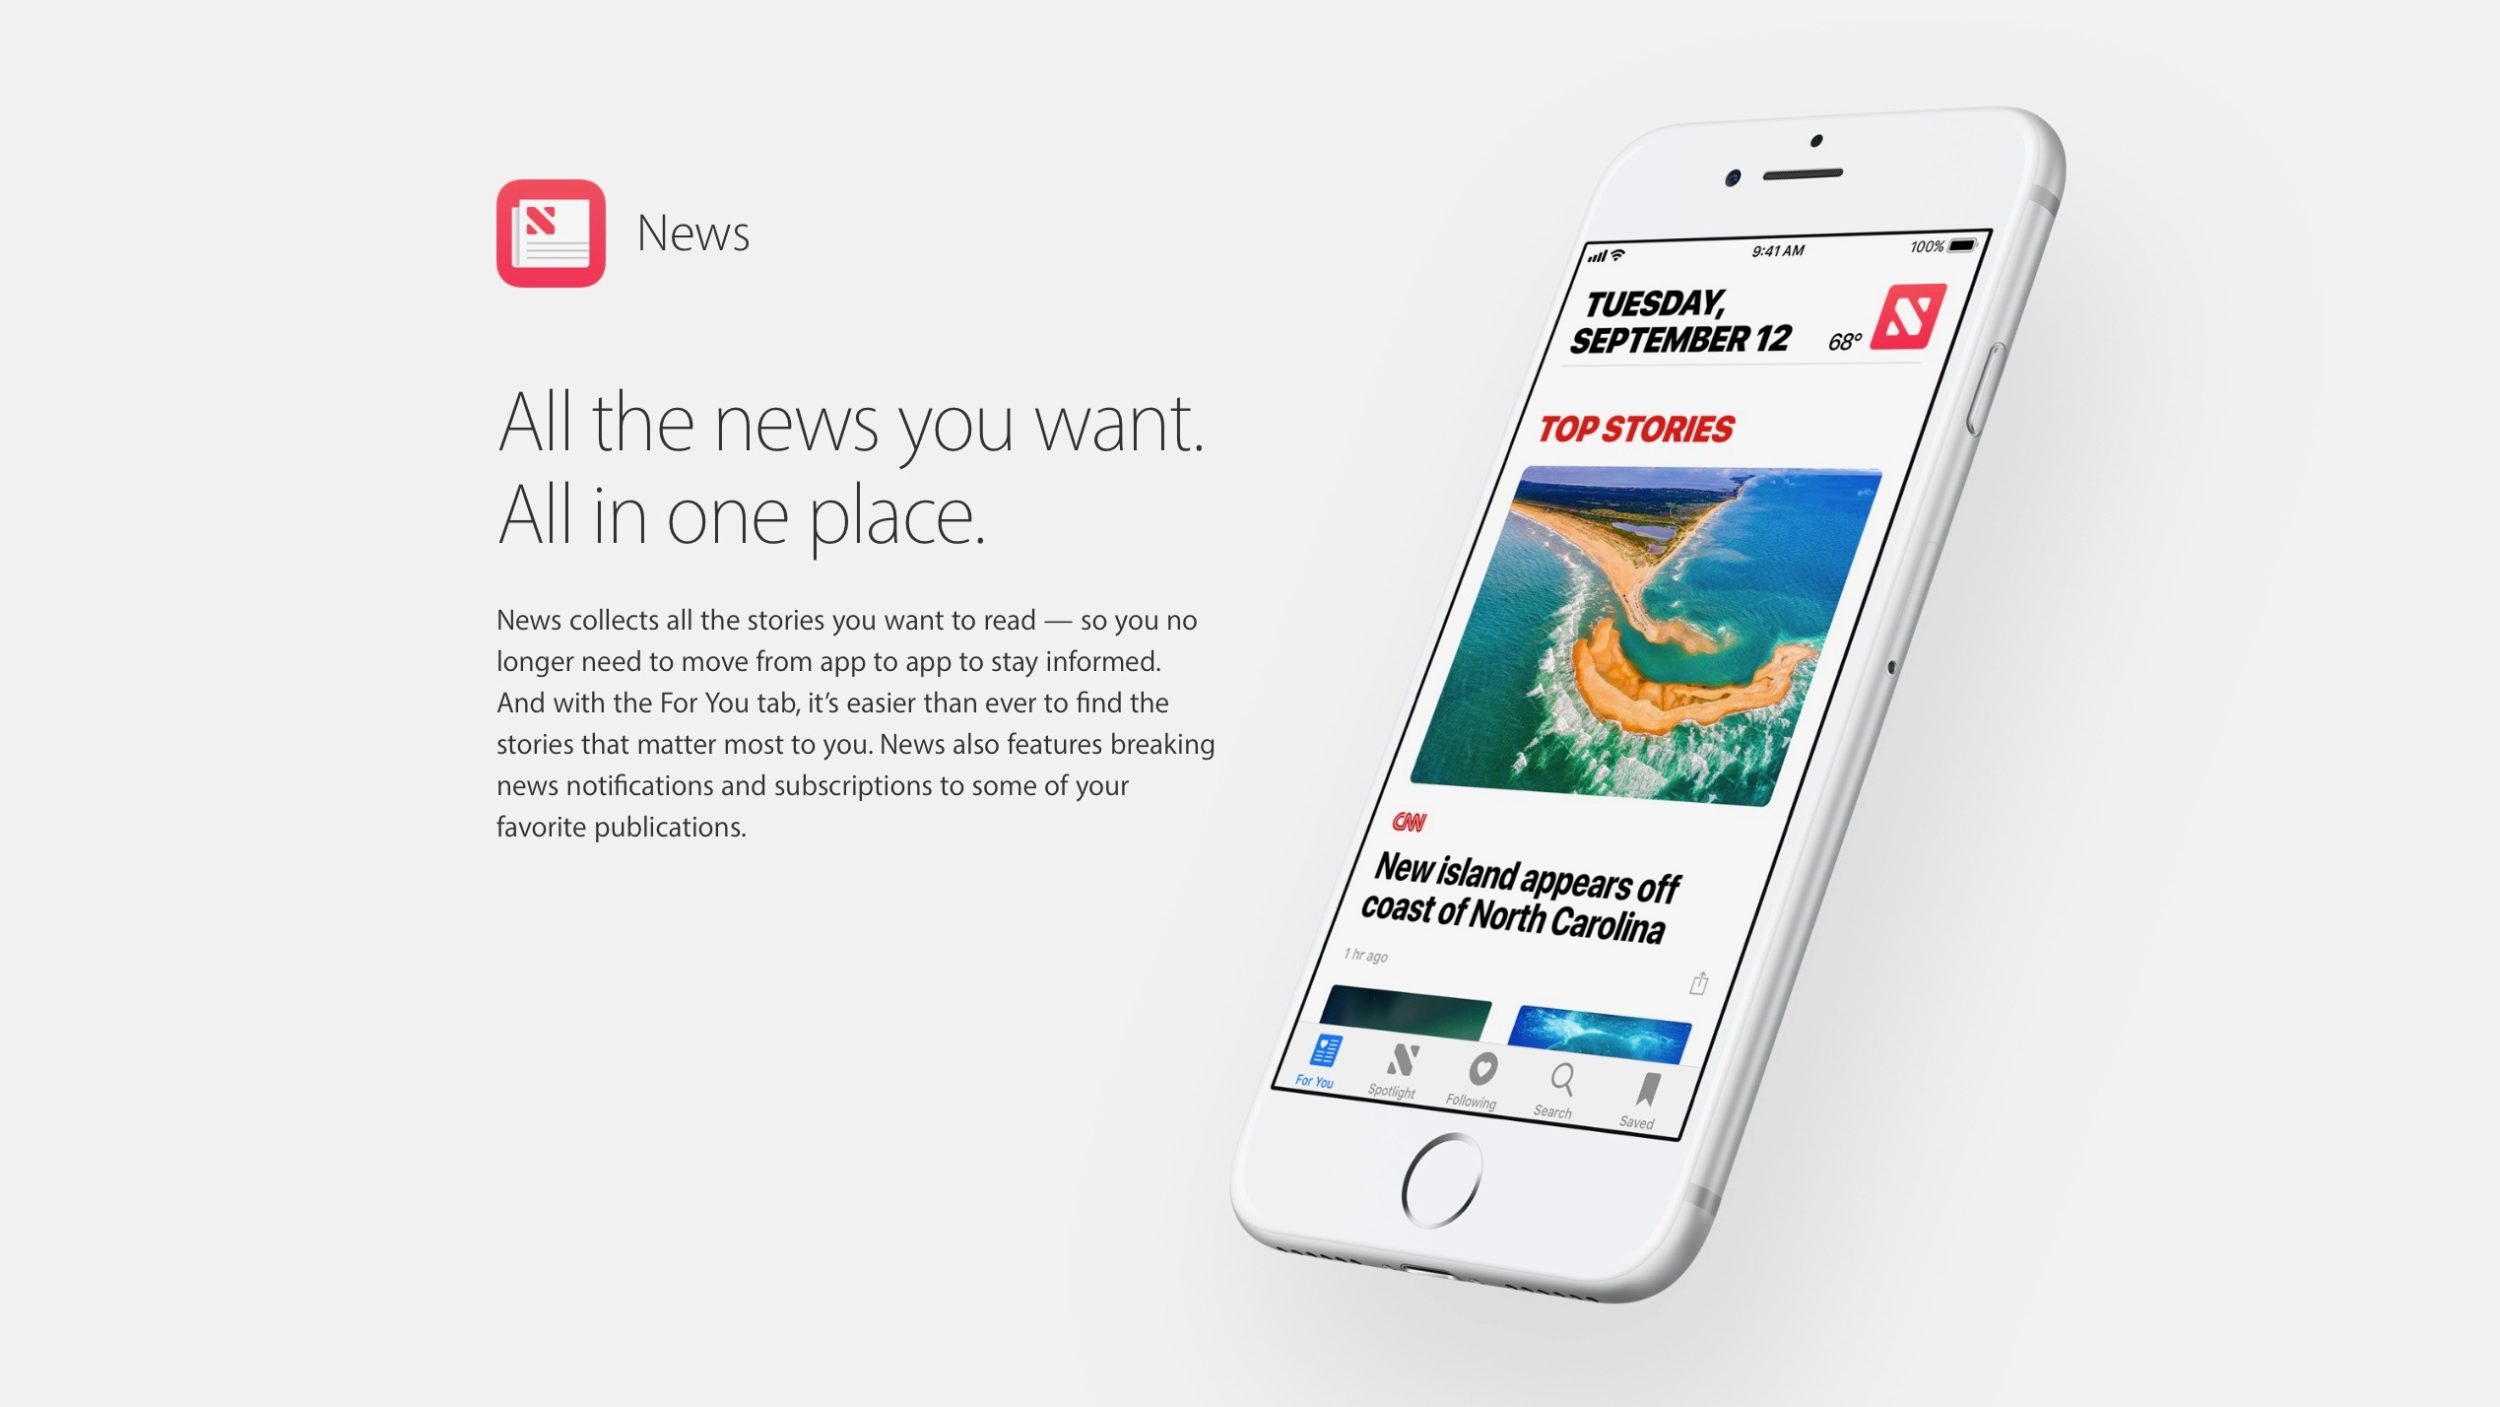 Apple Paying some Apple News Publishers for Early Exclusivity Rights to Video Content